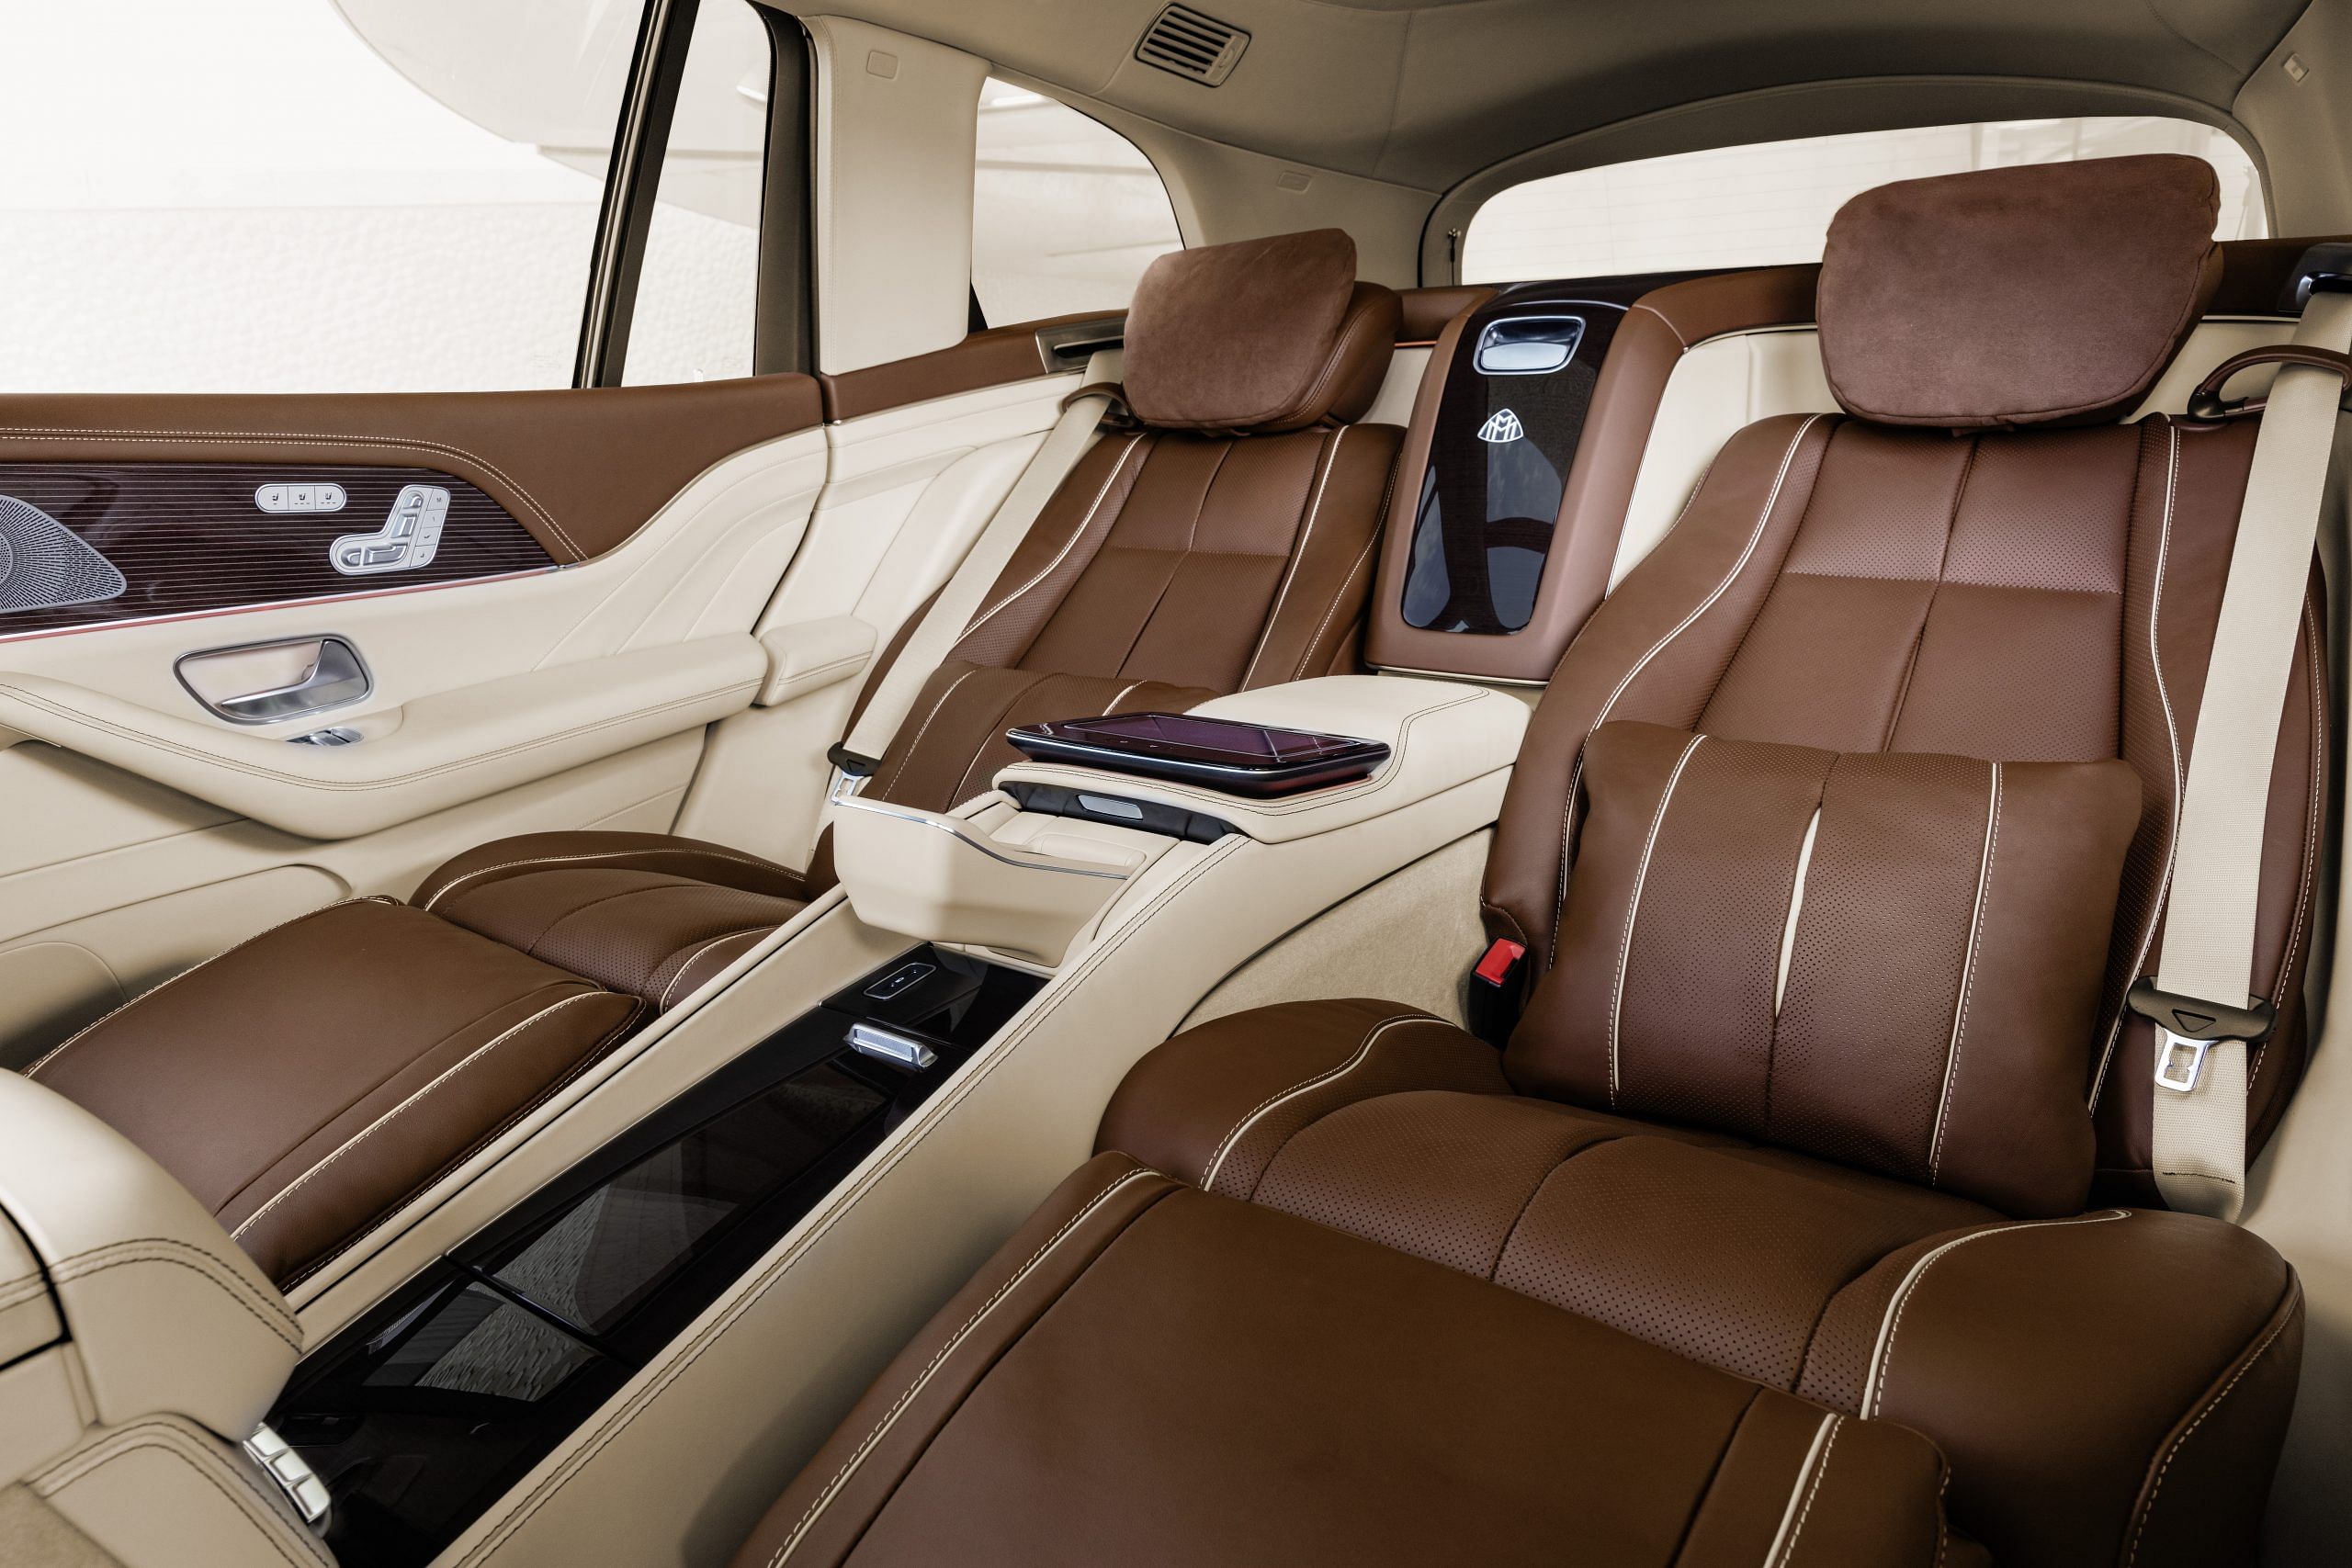 When you sit in a Maybach, you don't just enter a car. It's a ride into a  hallowed history